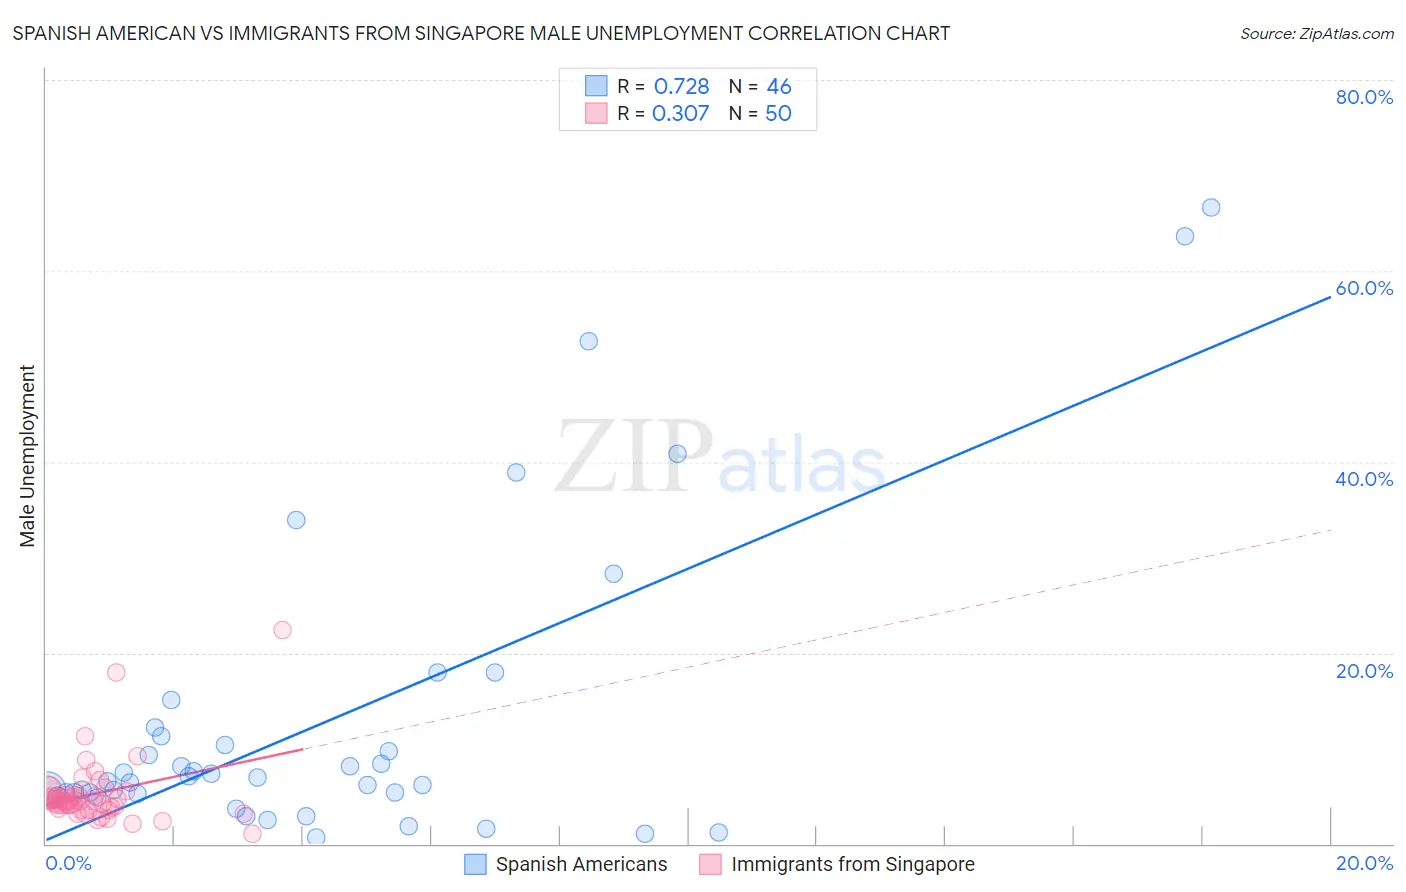 Spanish American vs Immigrants from Singapore Male Unemployment